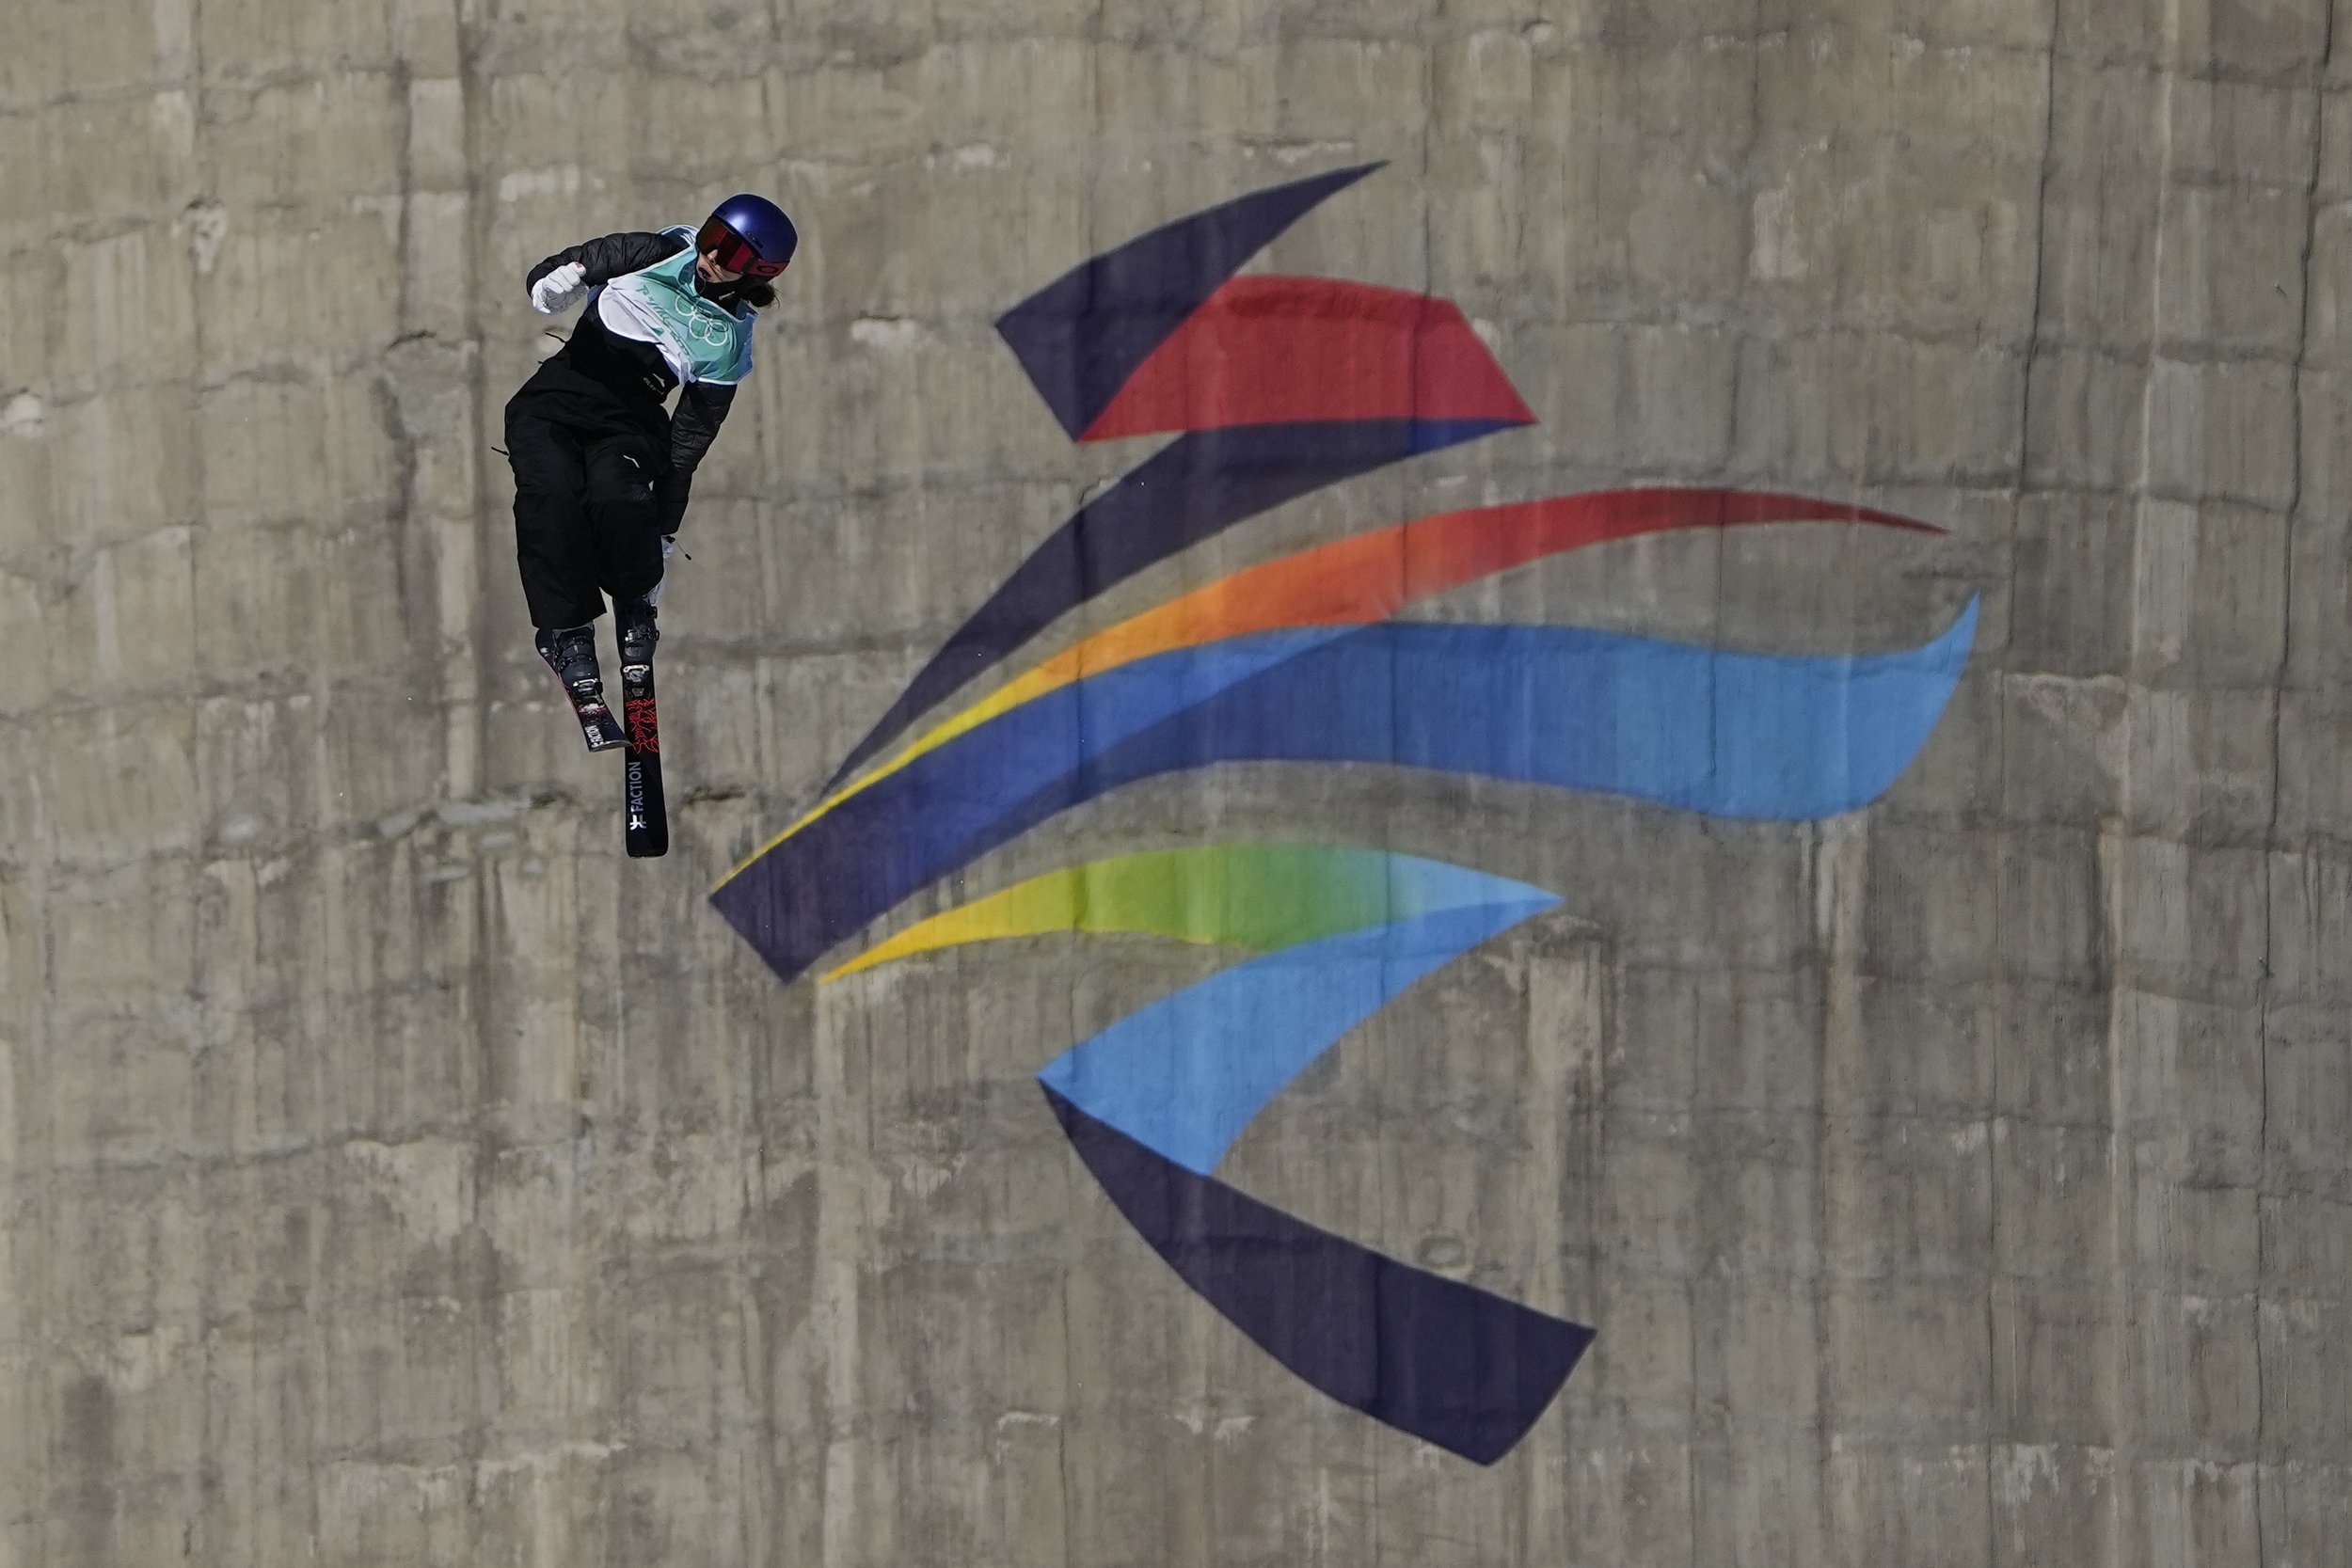  Eileen Gu, of China, competes during the women's freestyle skiing big air finals of the 2022 Winter Olympics, Tuesday, Feb. 8, 2022, in Beijing. (AP Photo/Jae C. Hong) 